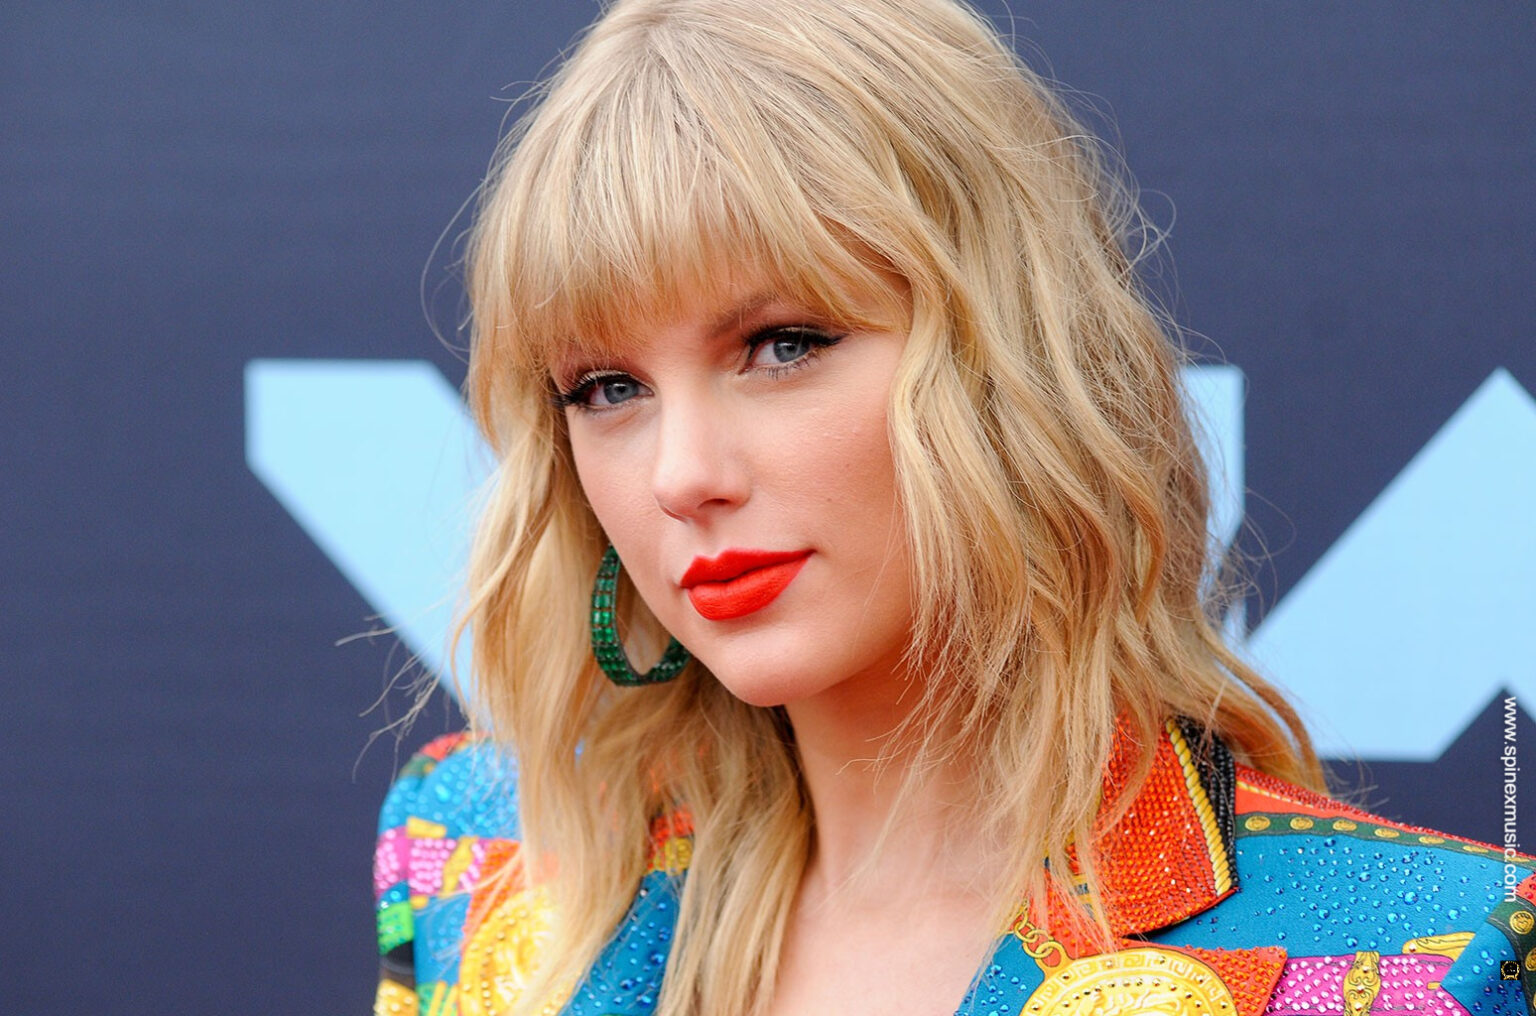 Taylor Swift’s ‘Evermore’ Album Breaks Record For U.S. Biggest Vinyl Sales In A Week